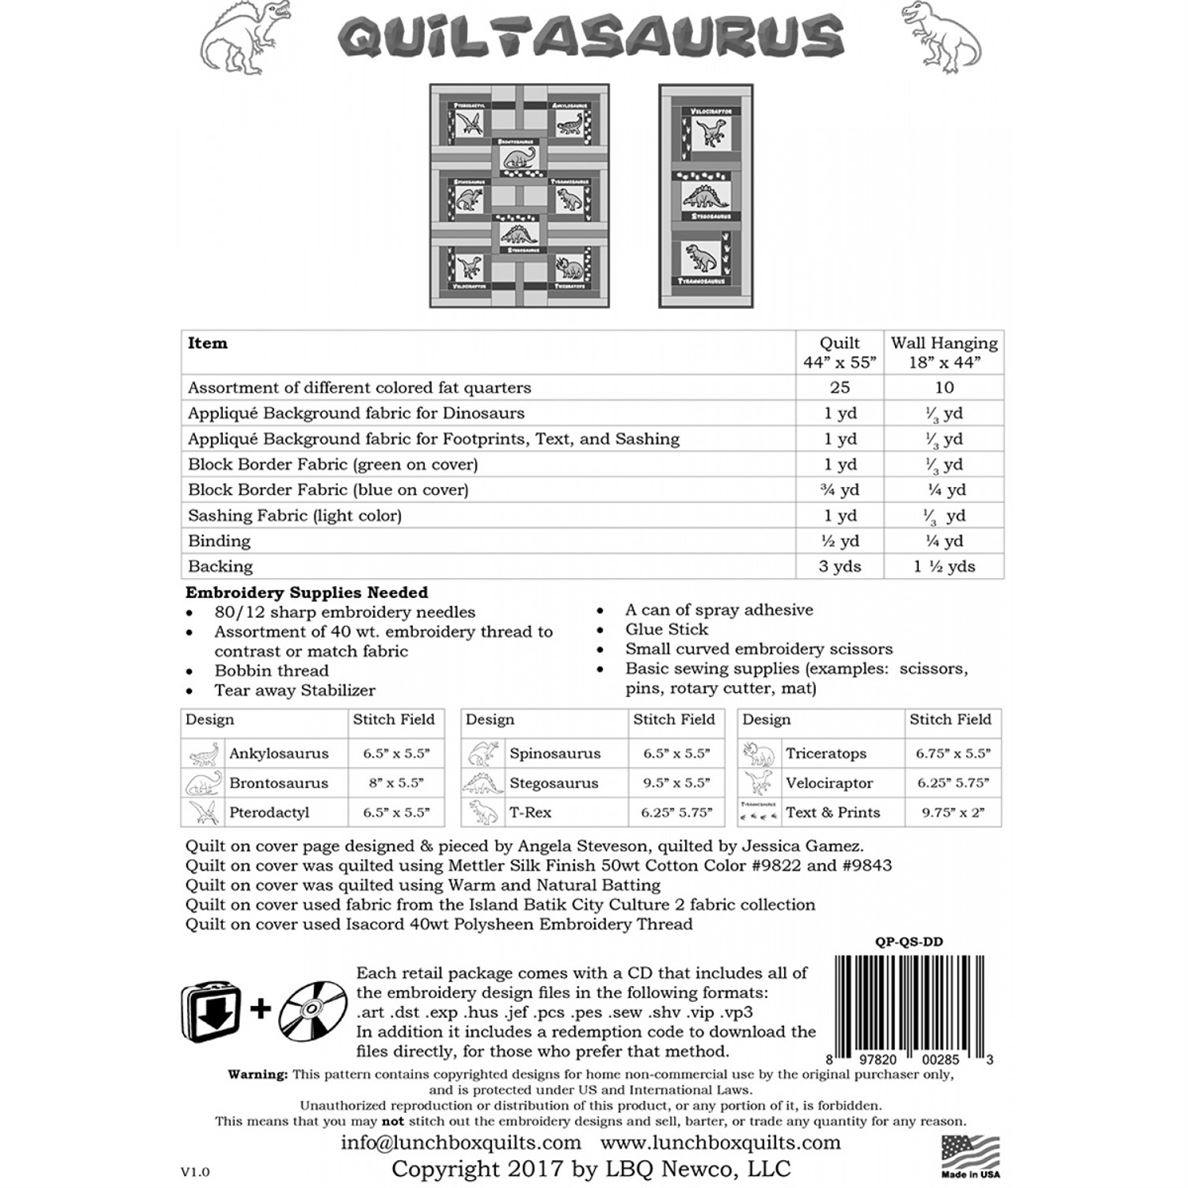 Materials list for Quiltasaurus quilt or wall hanging